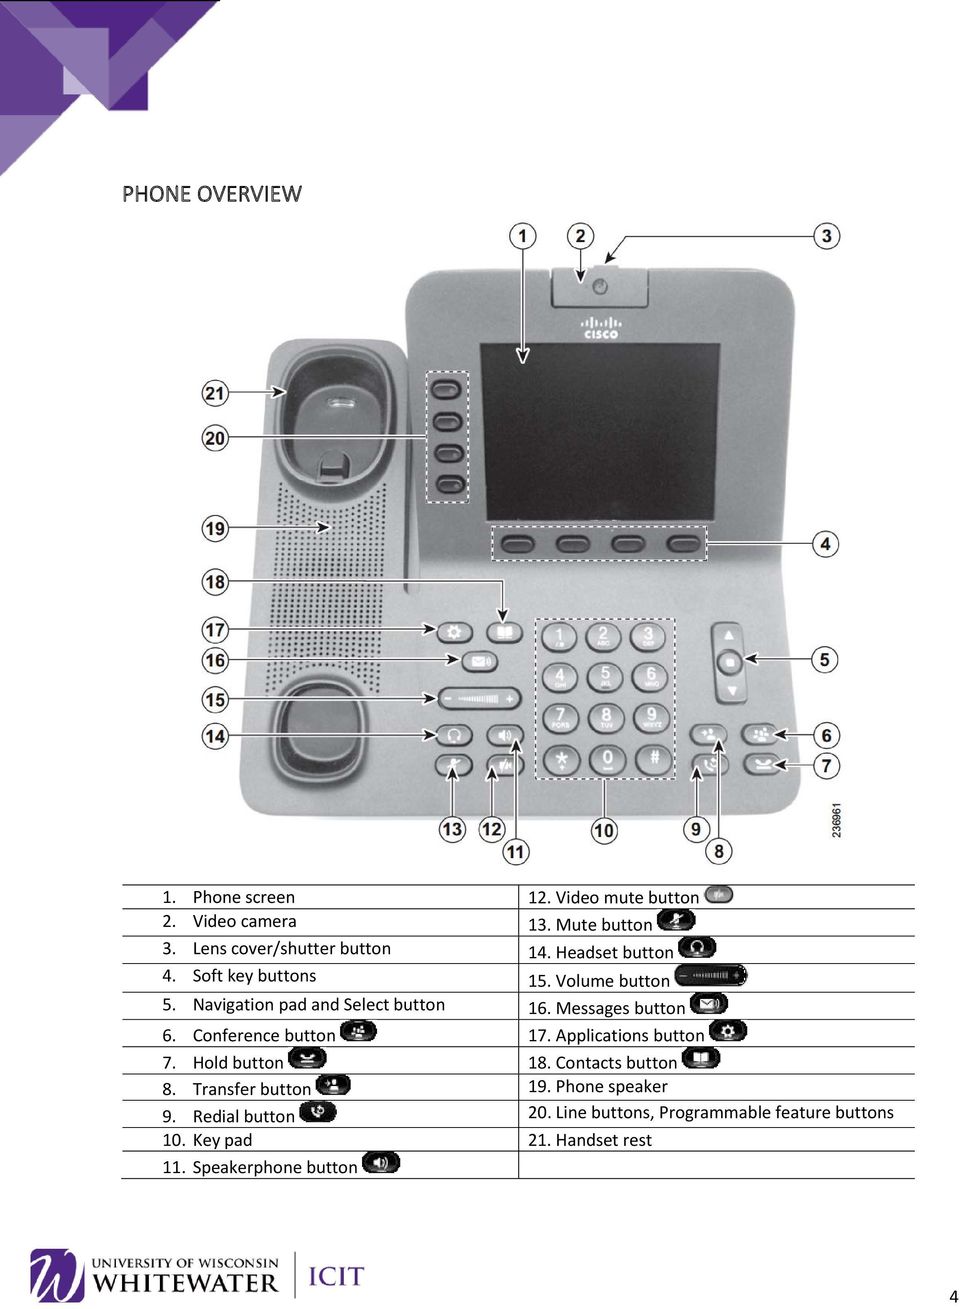 Navigation pad and Select button 16. Messages button 6. Conference button 17. Applications button 7. Hold button 18.